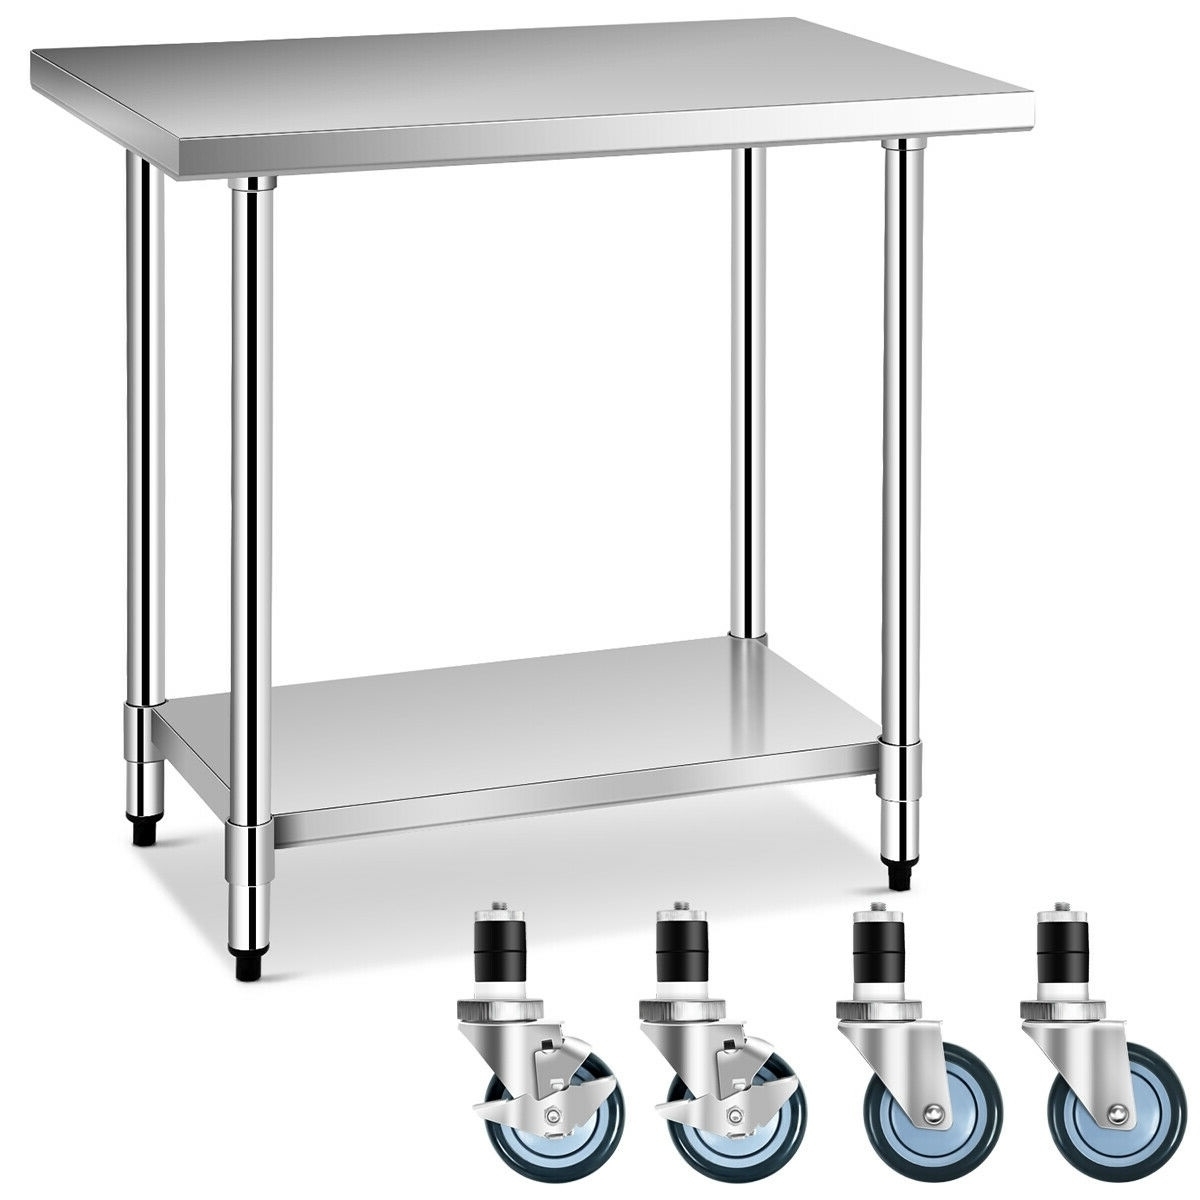 24'' X 36'' Stainless Steel Commercial Kitchen Work Table W/ 4 Wheels